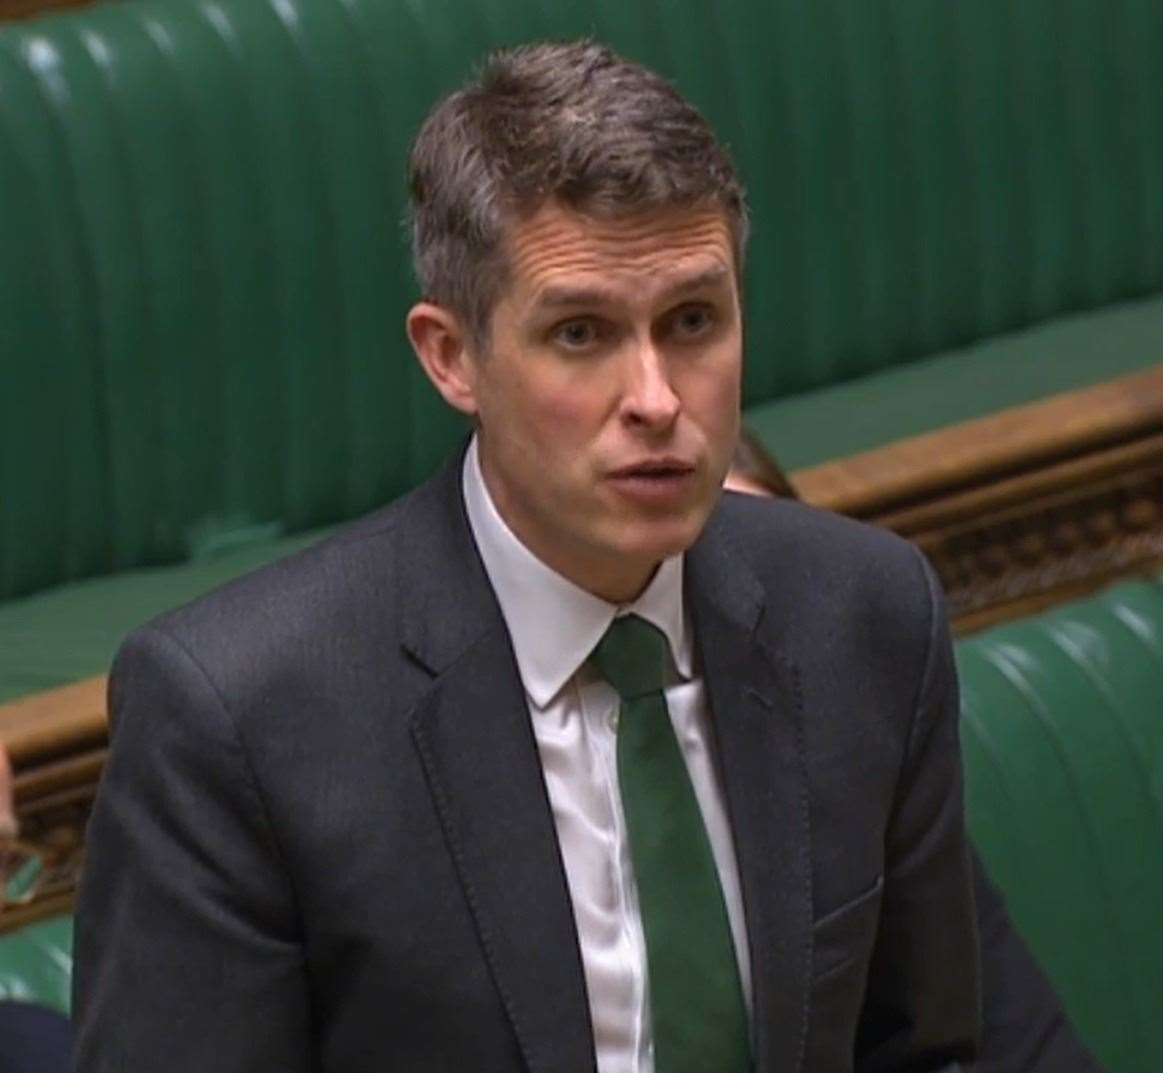 Education secretary Gavin Williamson says GCSE results will issue teacher-assessed grades and not those moderated by Ofqual